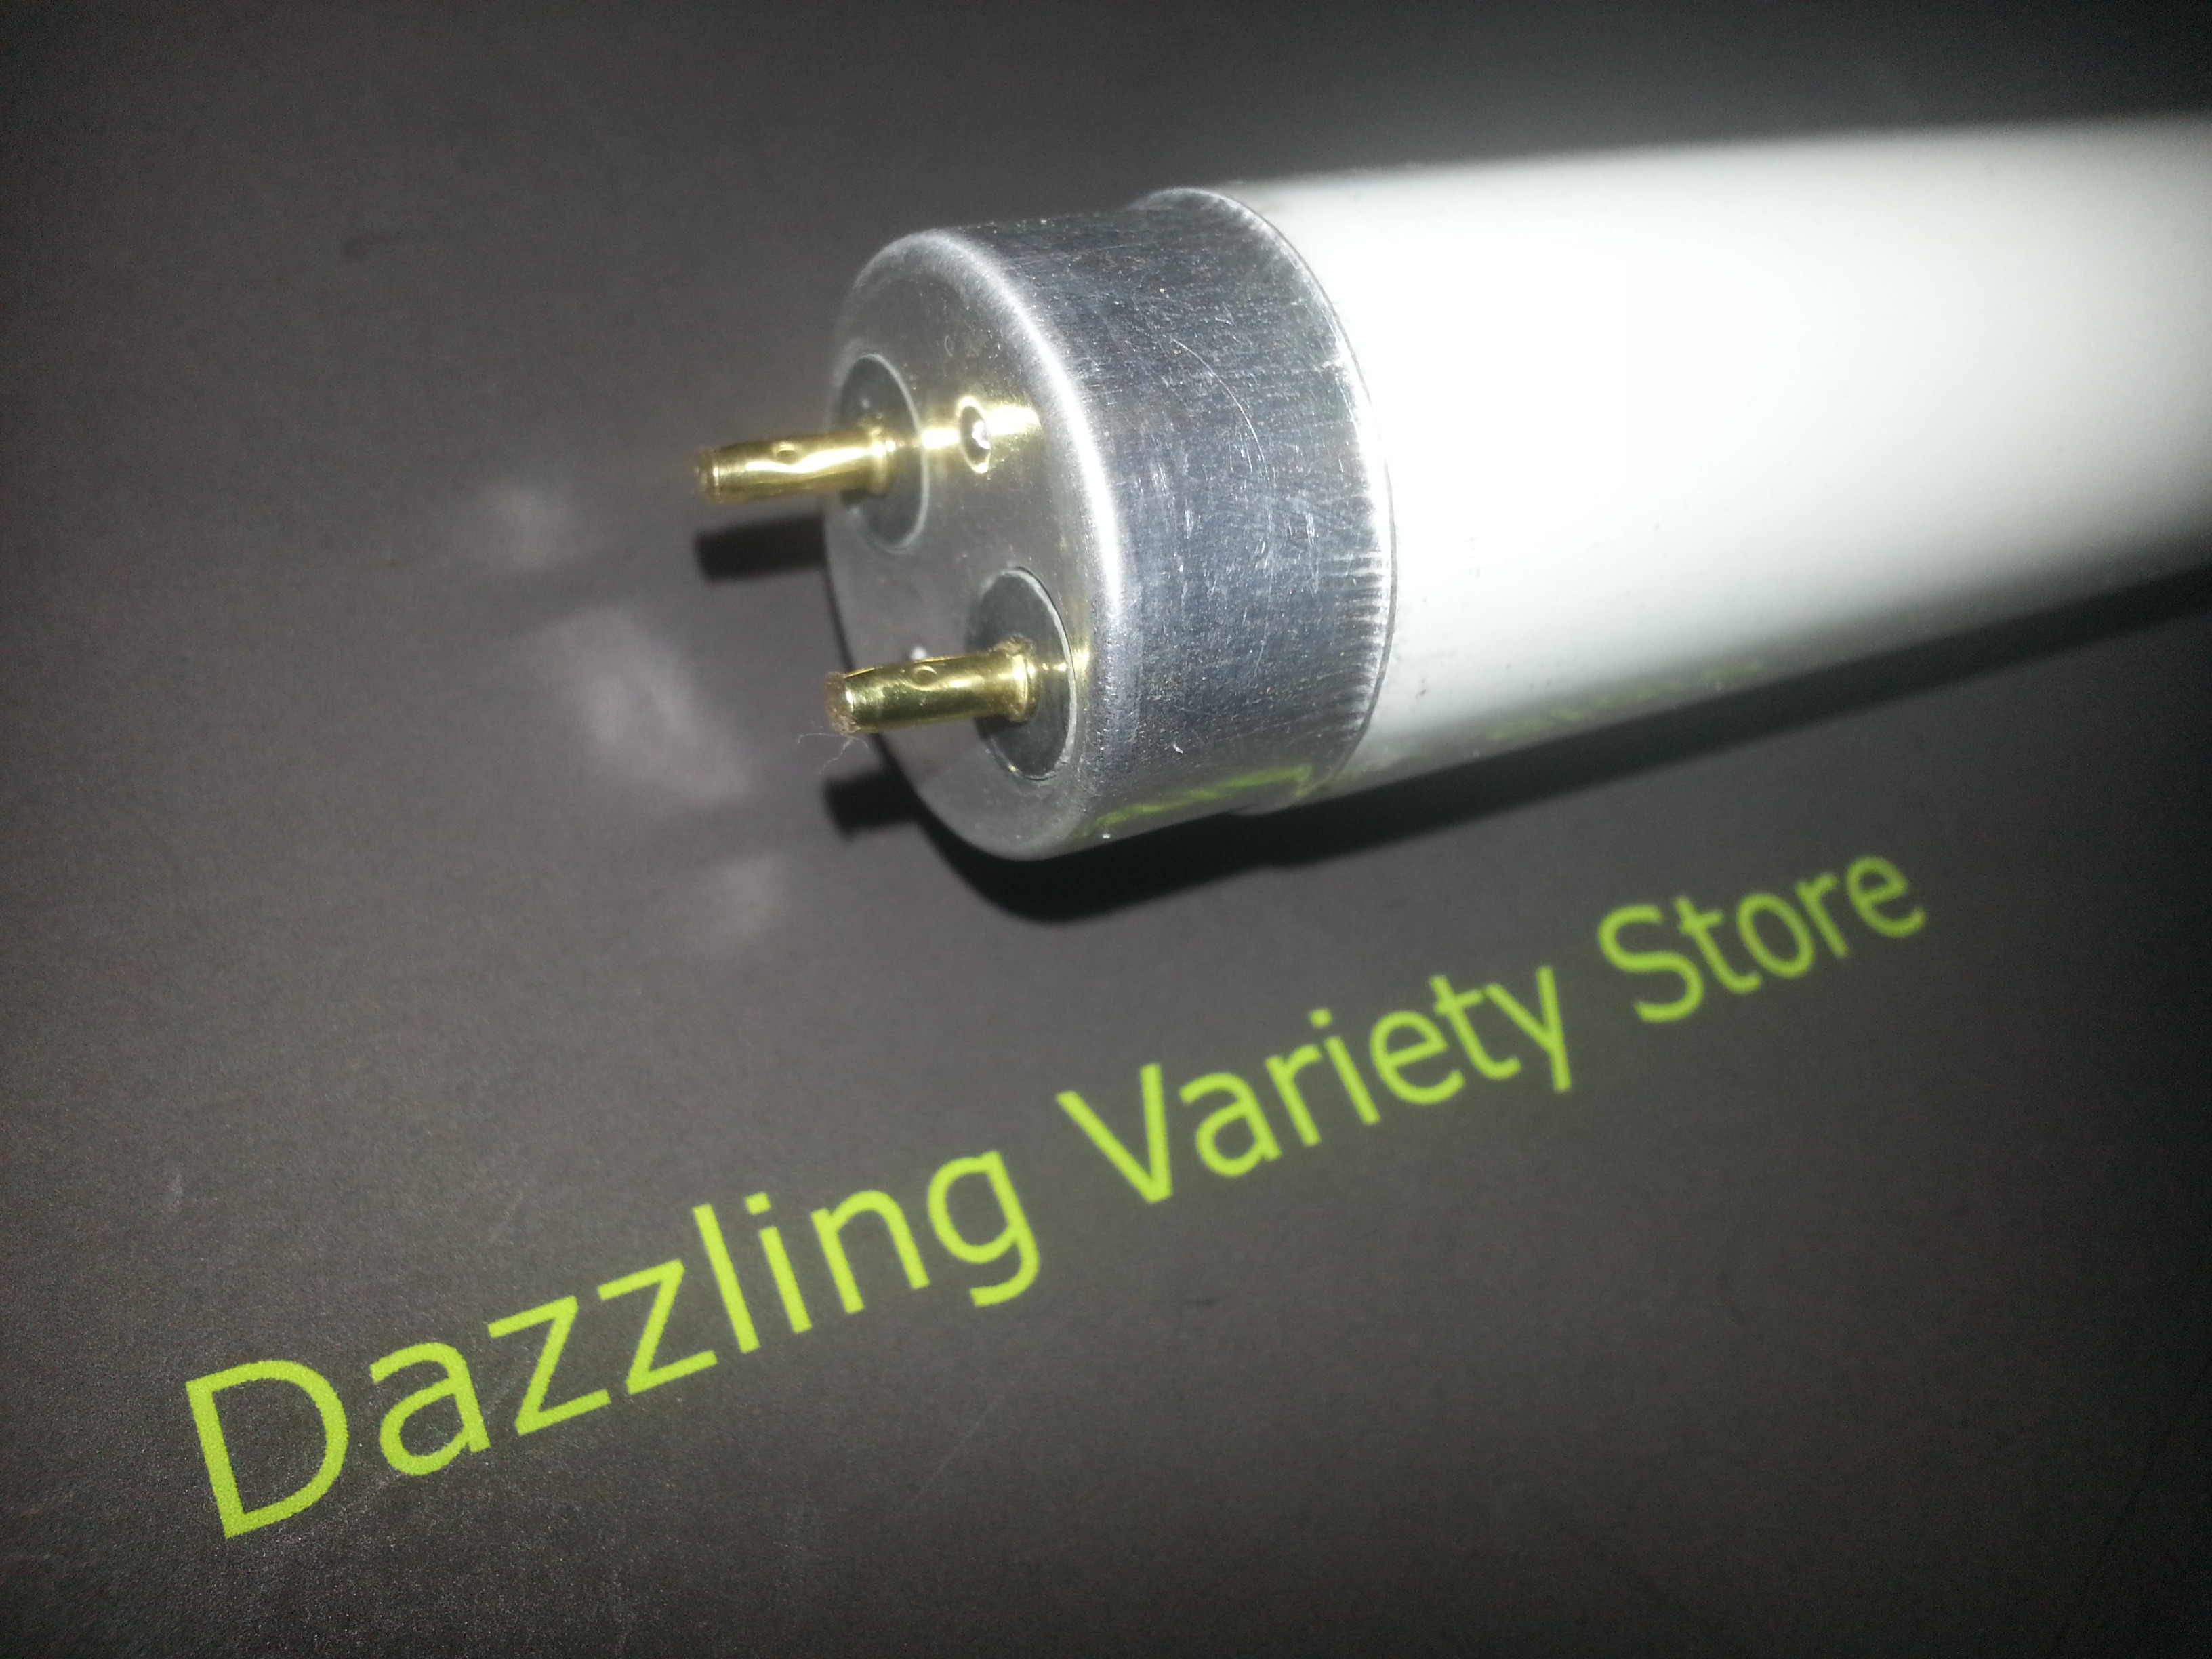 25 x 4ft 36W T8 Cool White Fluorescent Tube Lamps